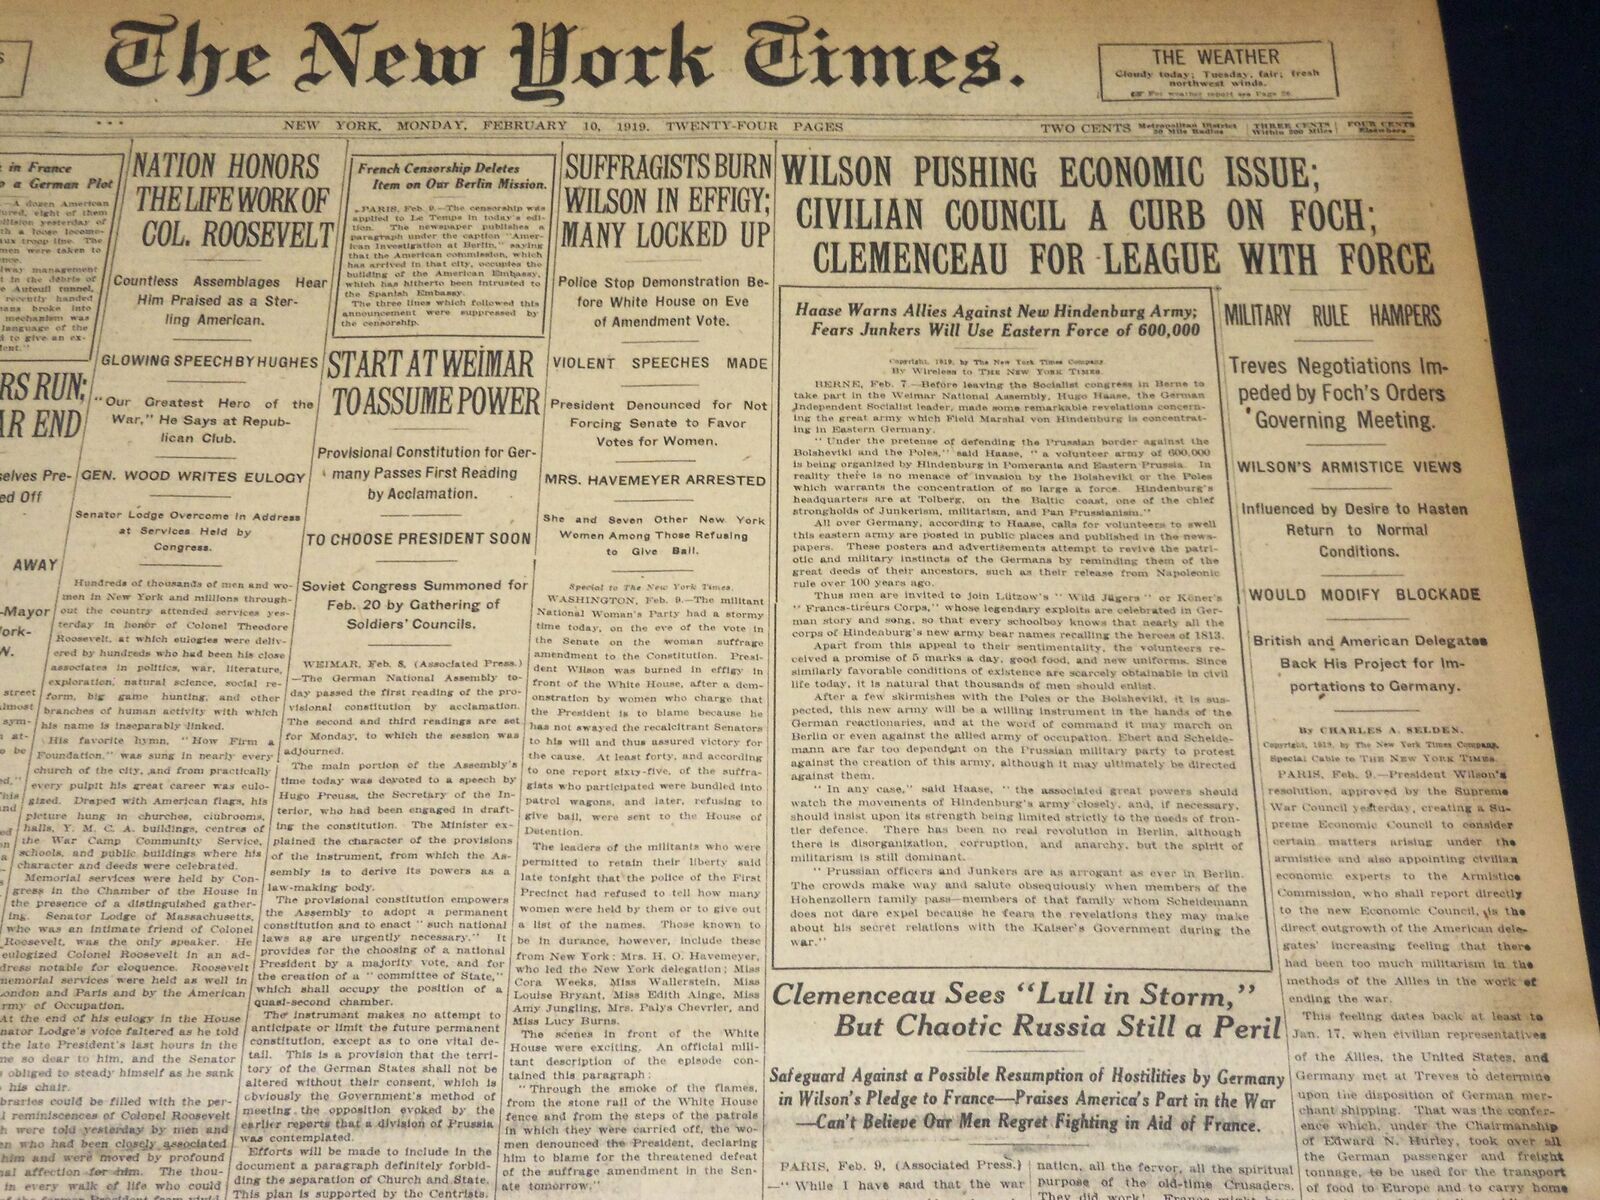 1919 FEBRUARY 10 NEW YORK TIMES - NATION HONORS LIFE WORK OF ROOSEVELT - NT 7963